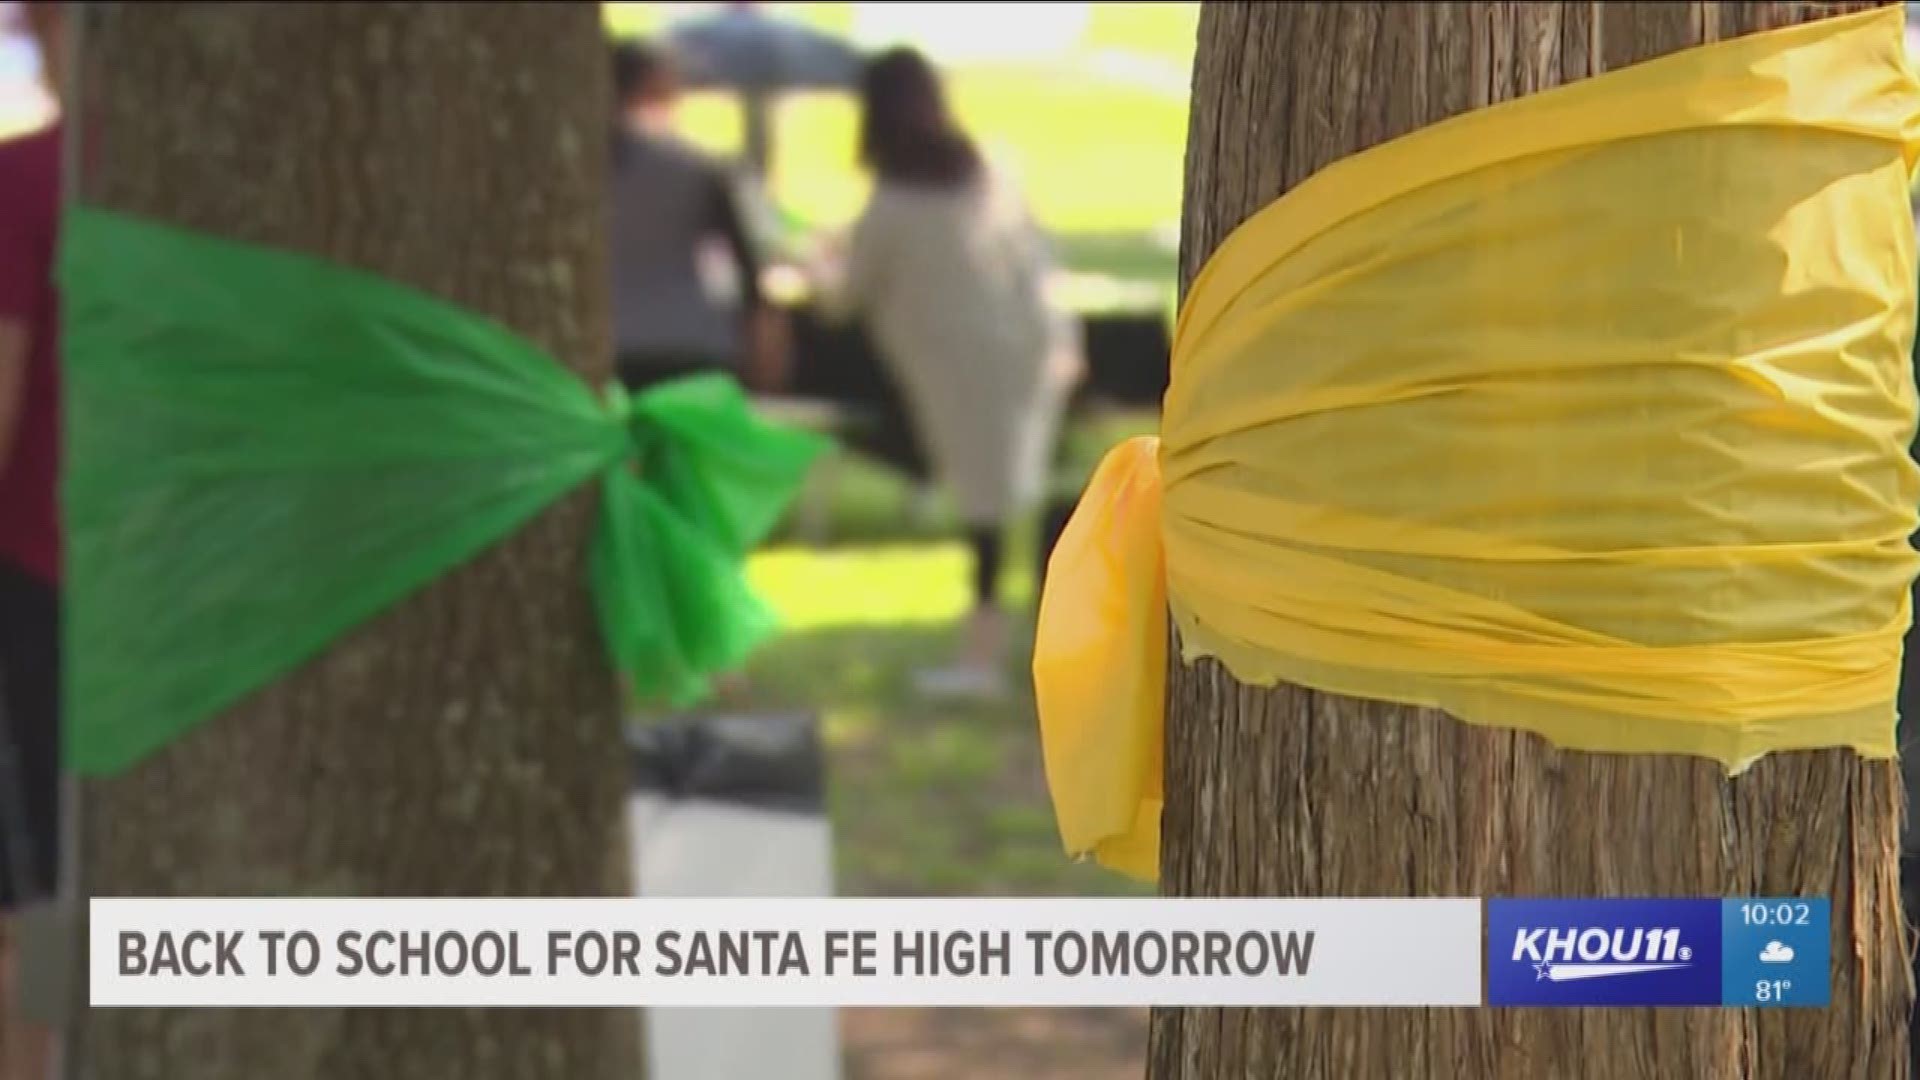 Santa Fe High School students will return to campus Tuesday for the first time since a gunman killed 10 people and injured 13 others.In a letter sent to students and parents, principal Rachel Blundell explains how the remainder of the school year will be